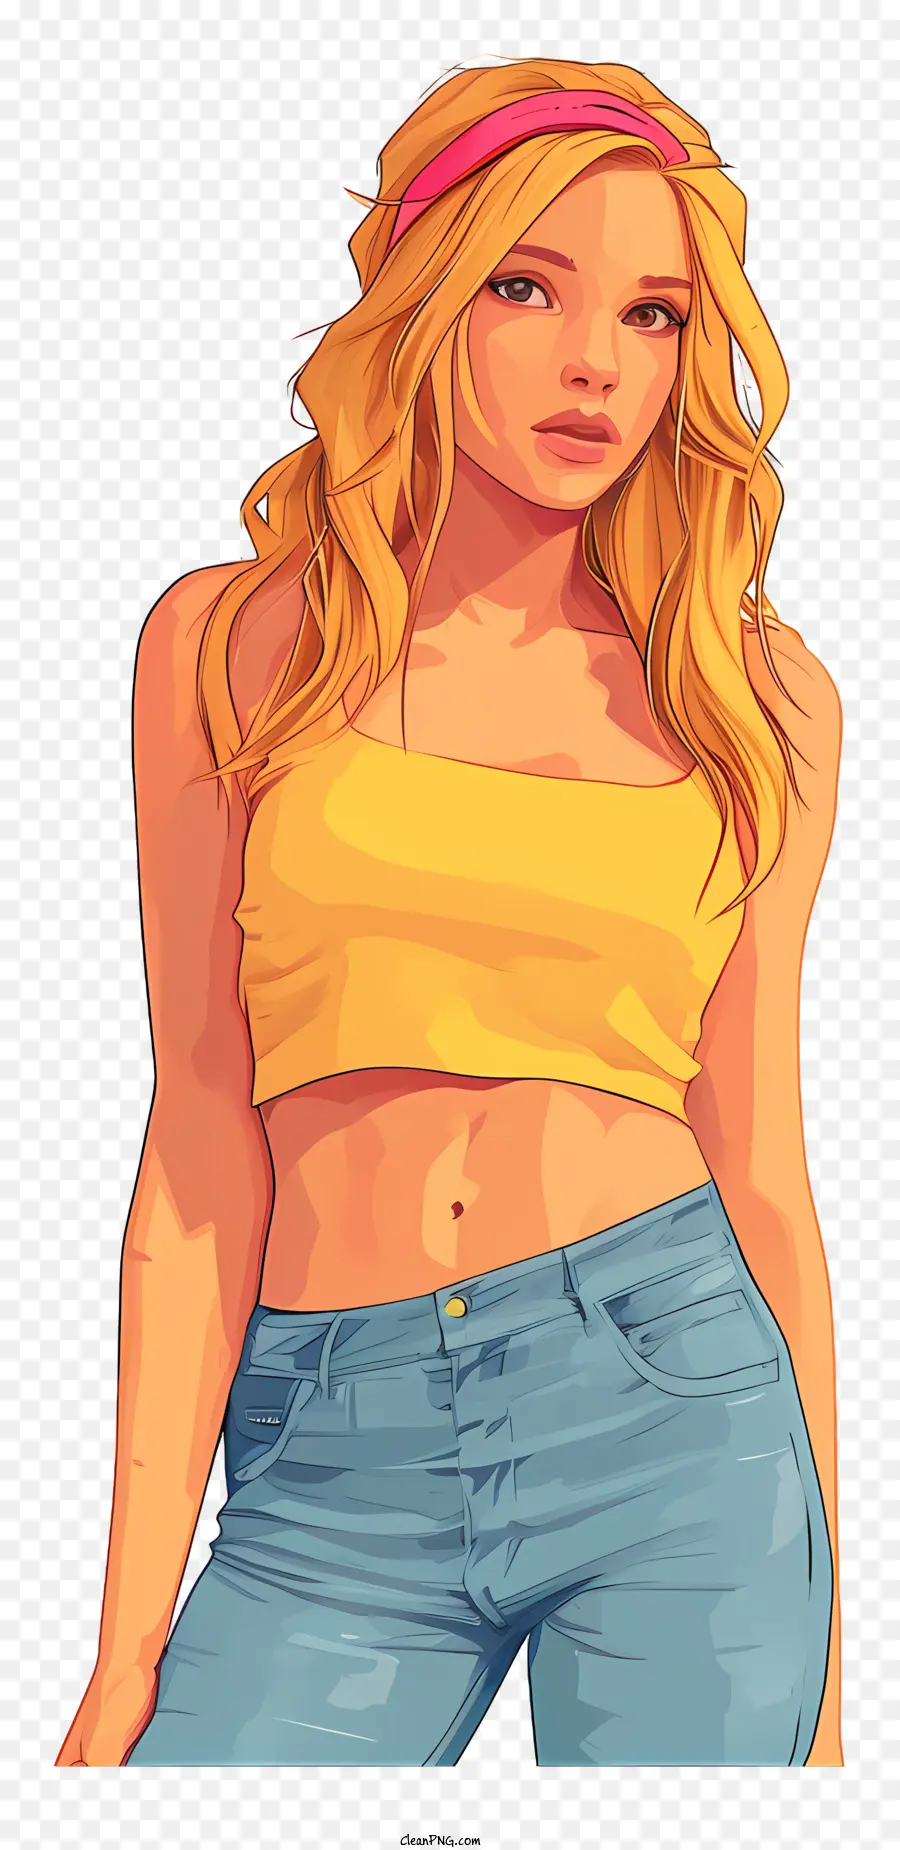 doodle style pose it 2d illustration woman yellow top blue jeans